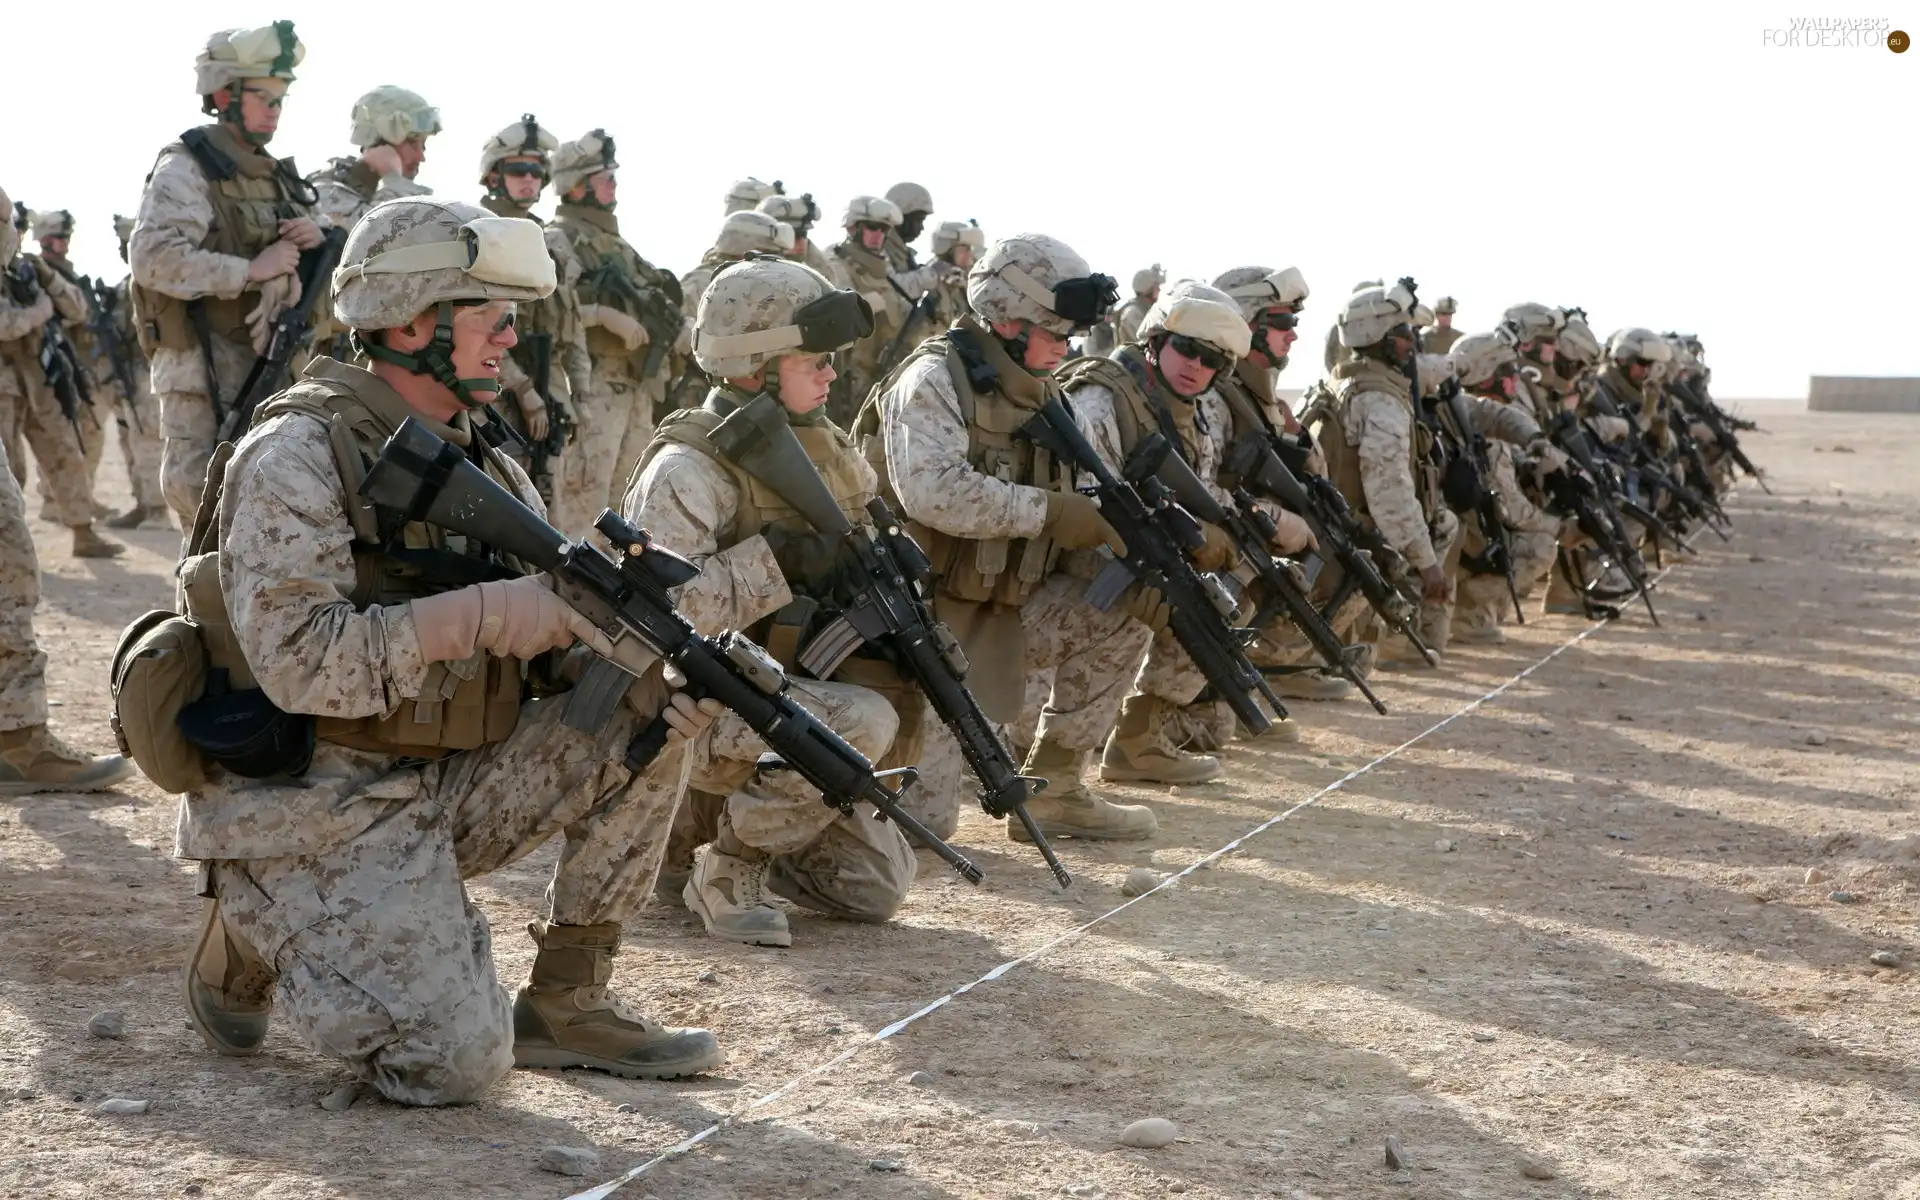 soldiers, Weapons